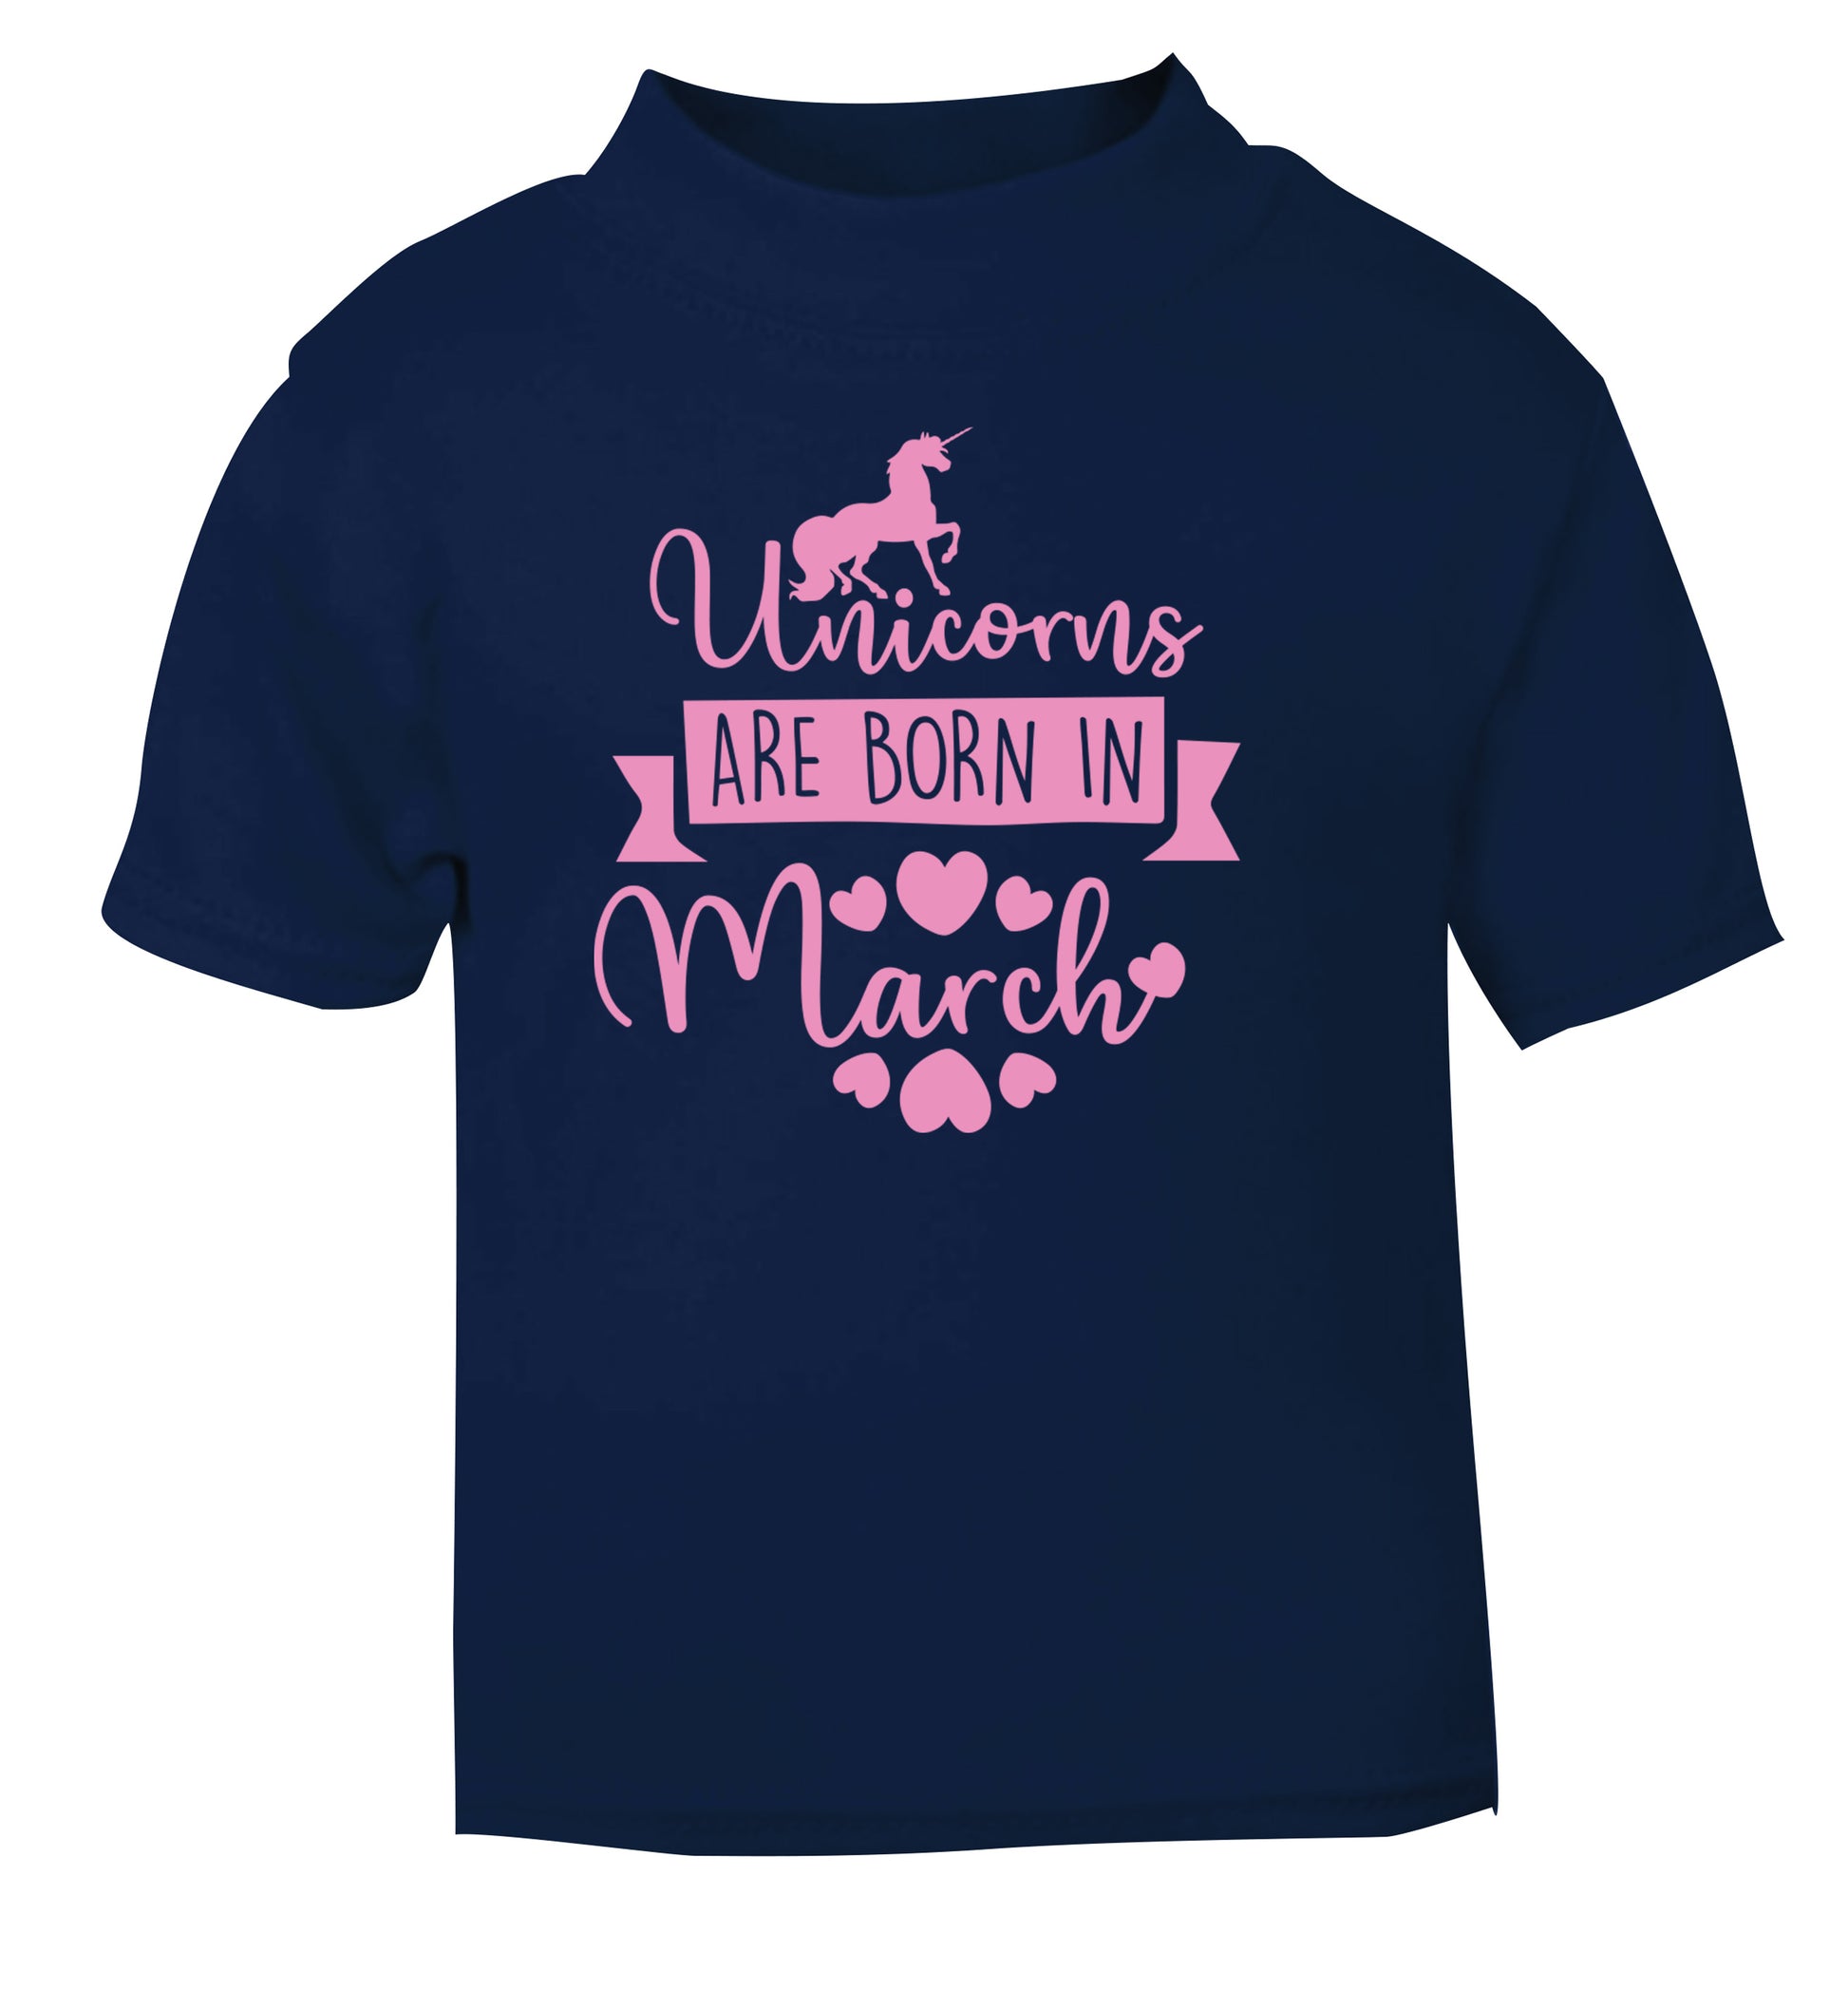 Unicorns are born in March navy Baby Toddler Tshirt 2 Years